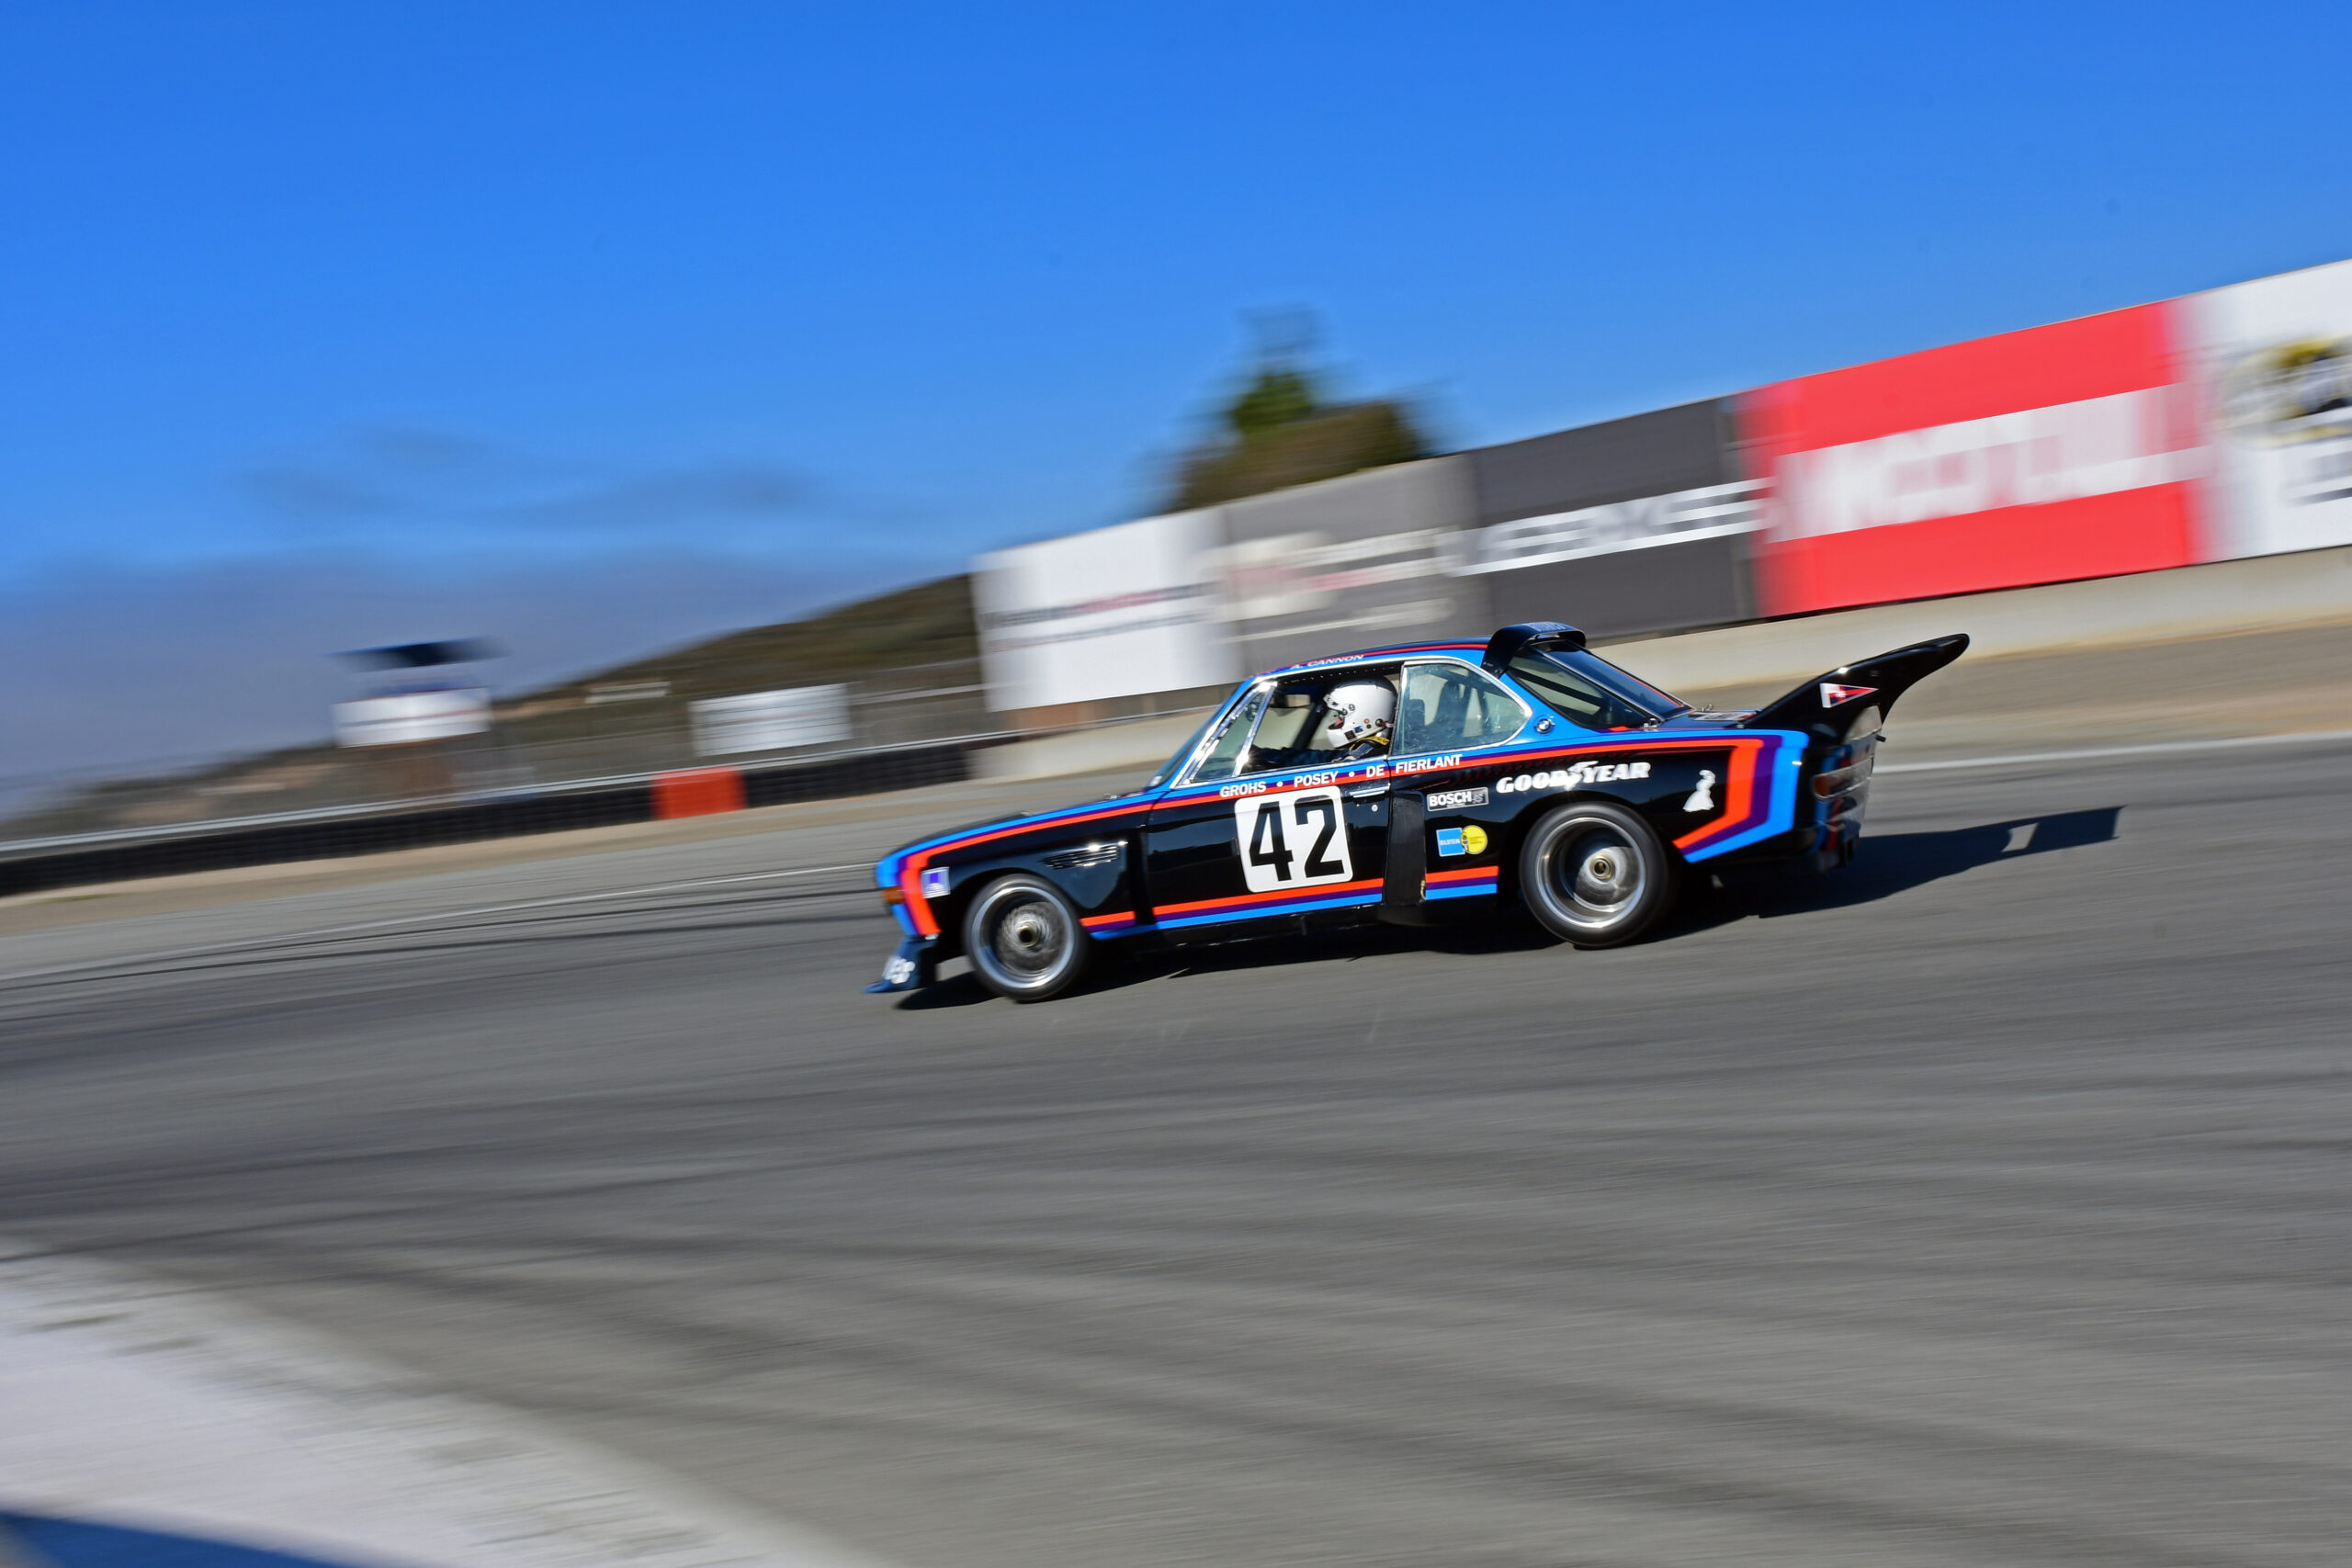 12 race cars on 2022's Monterey auction grid - Hagerty Motorsports